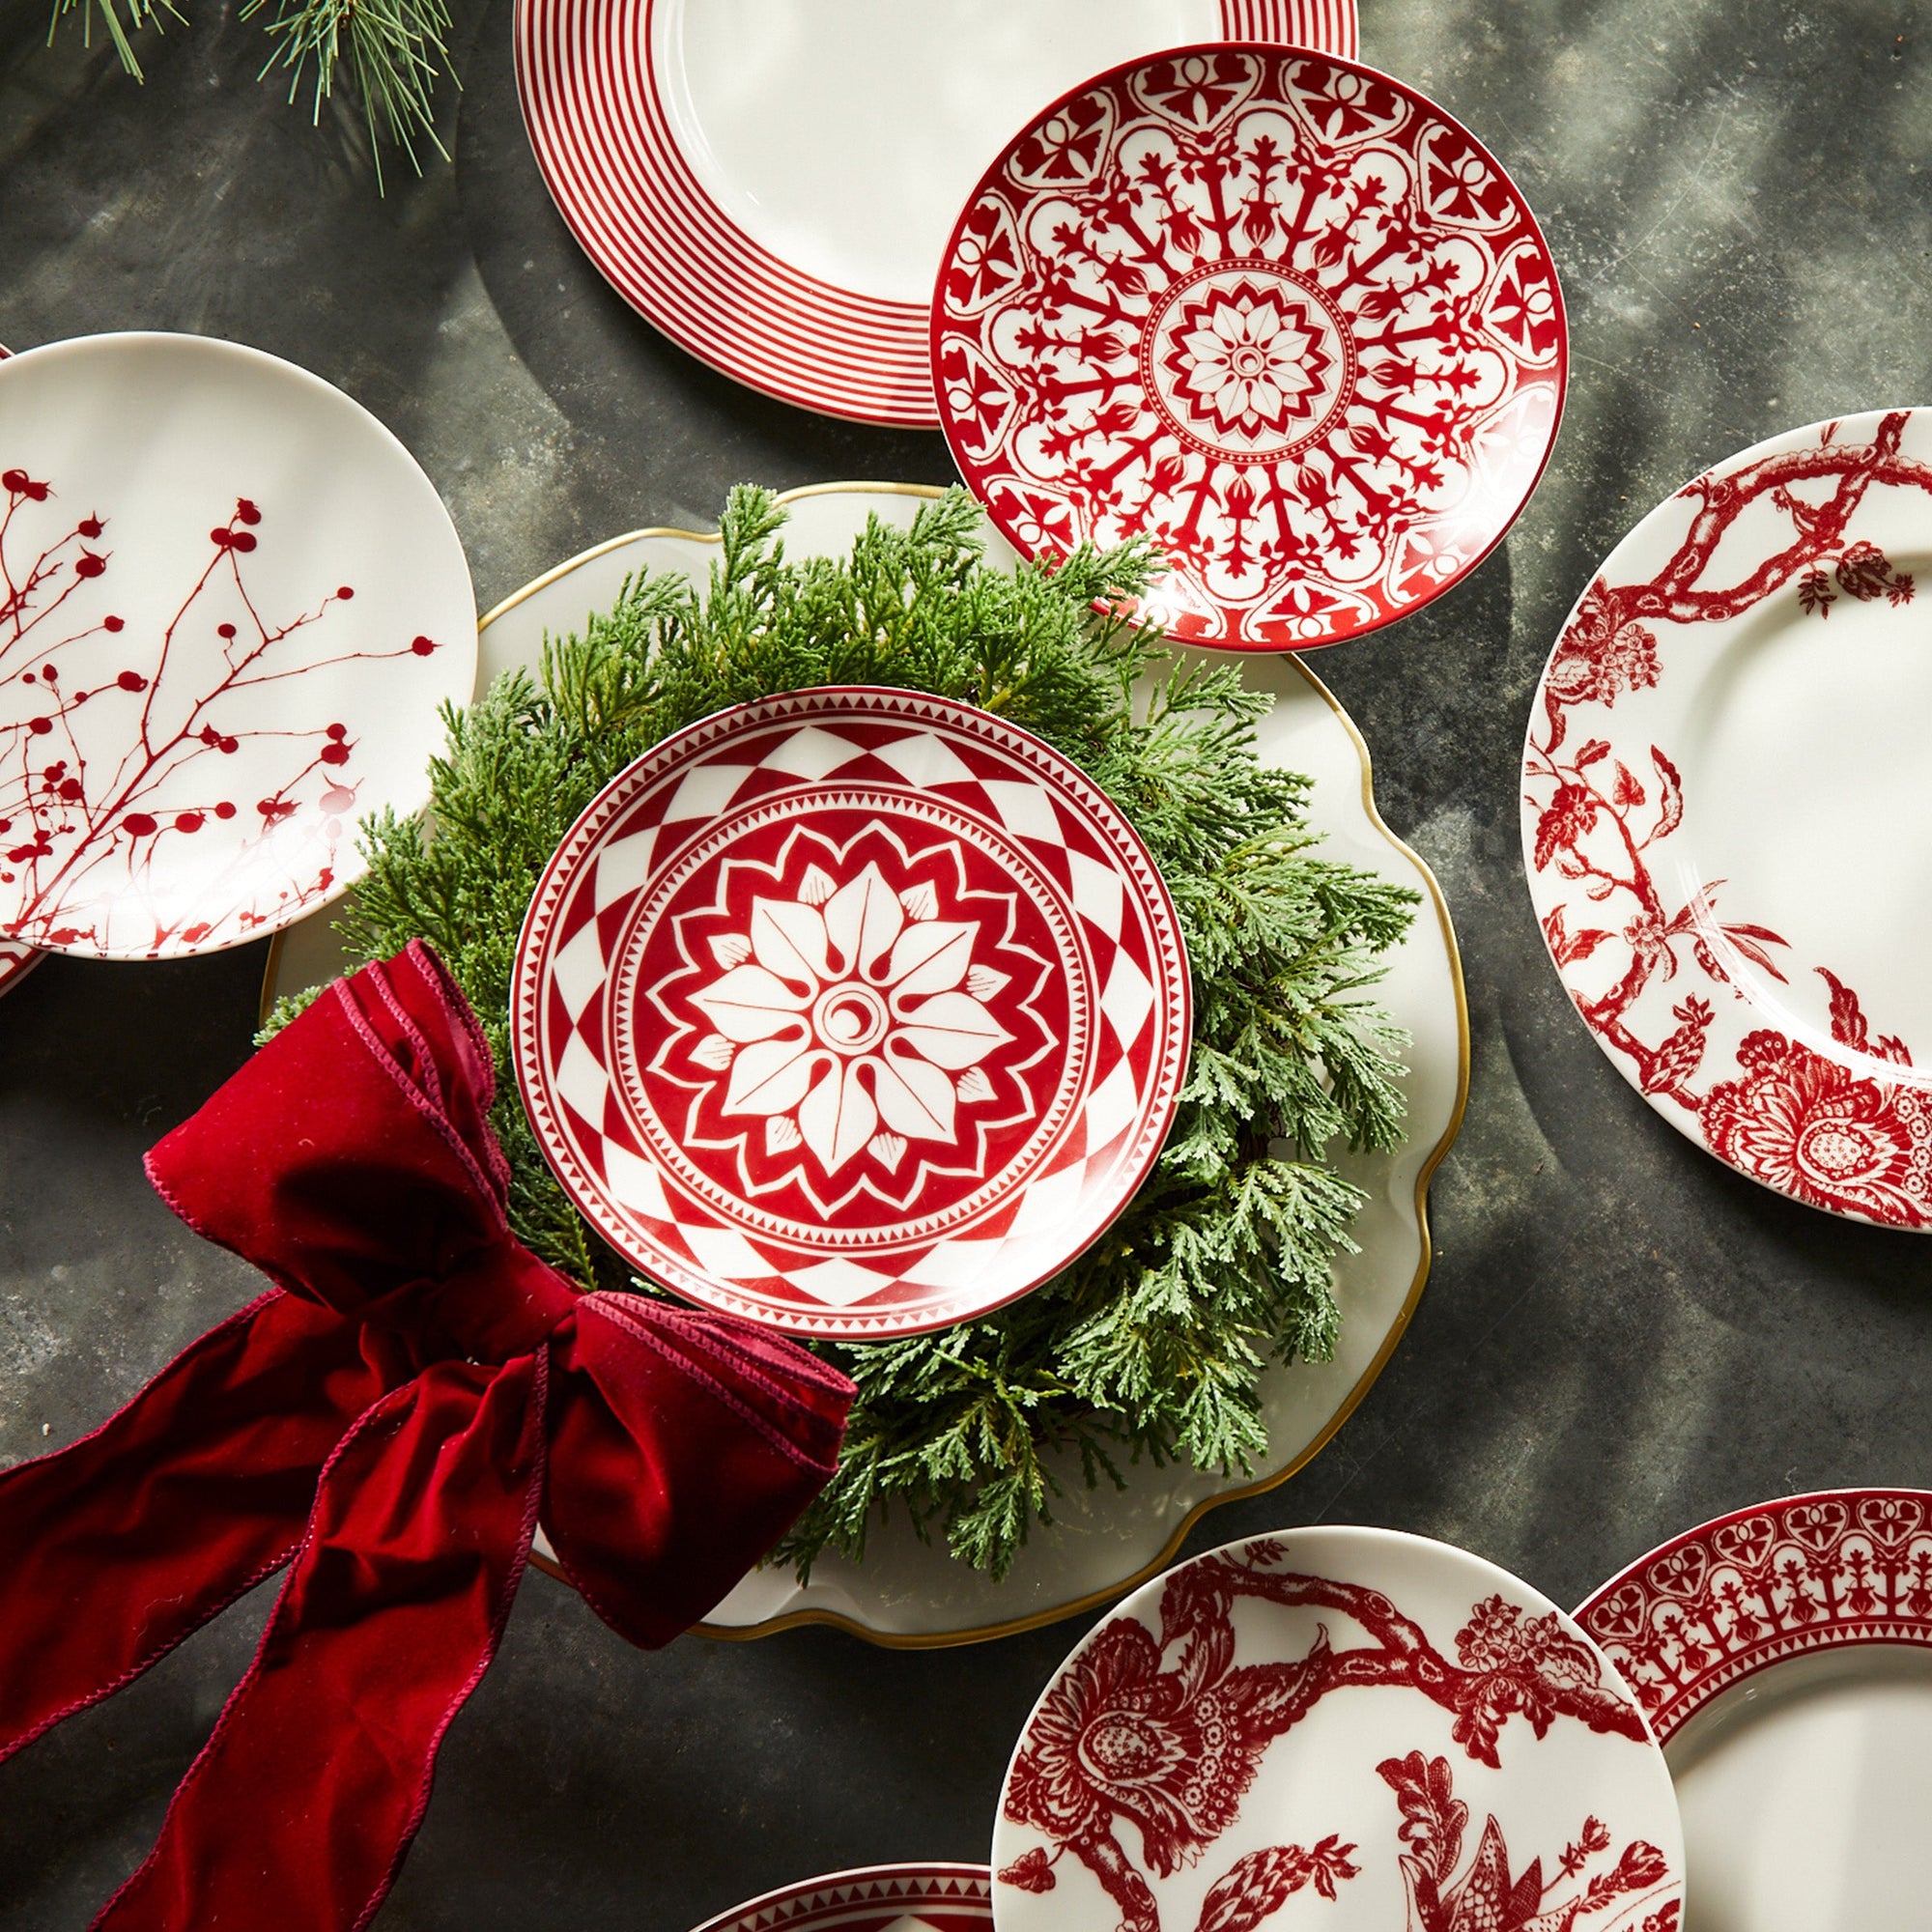 A group of plates with red and white designs.